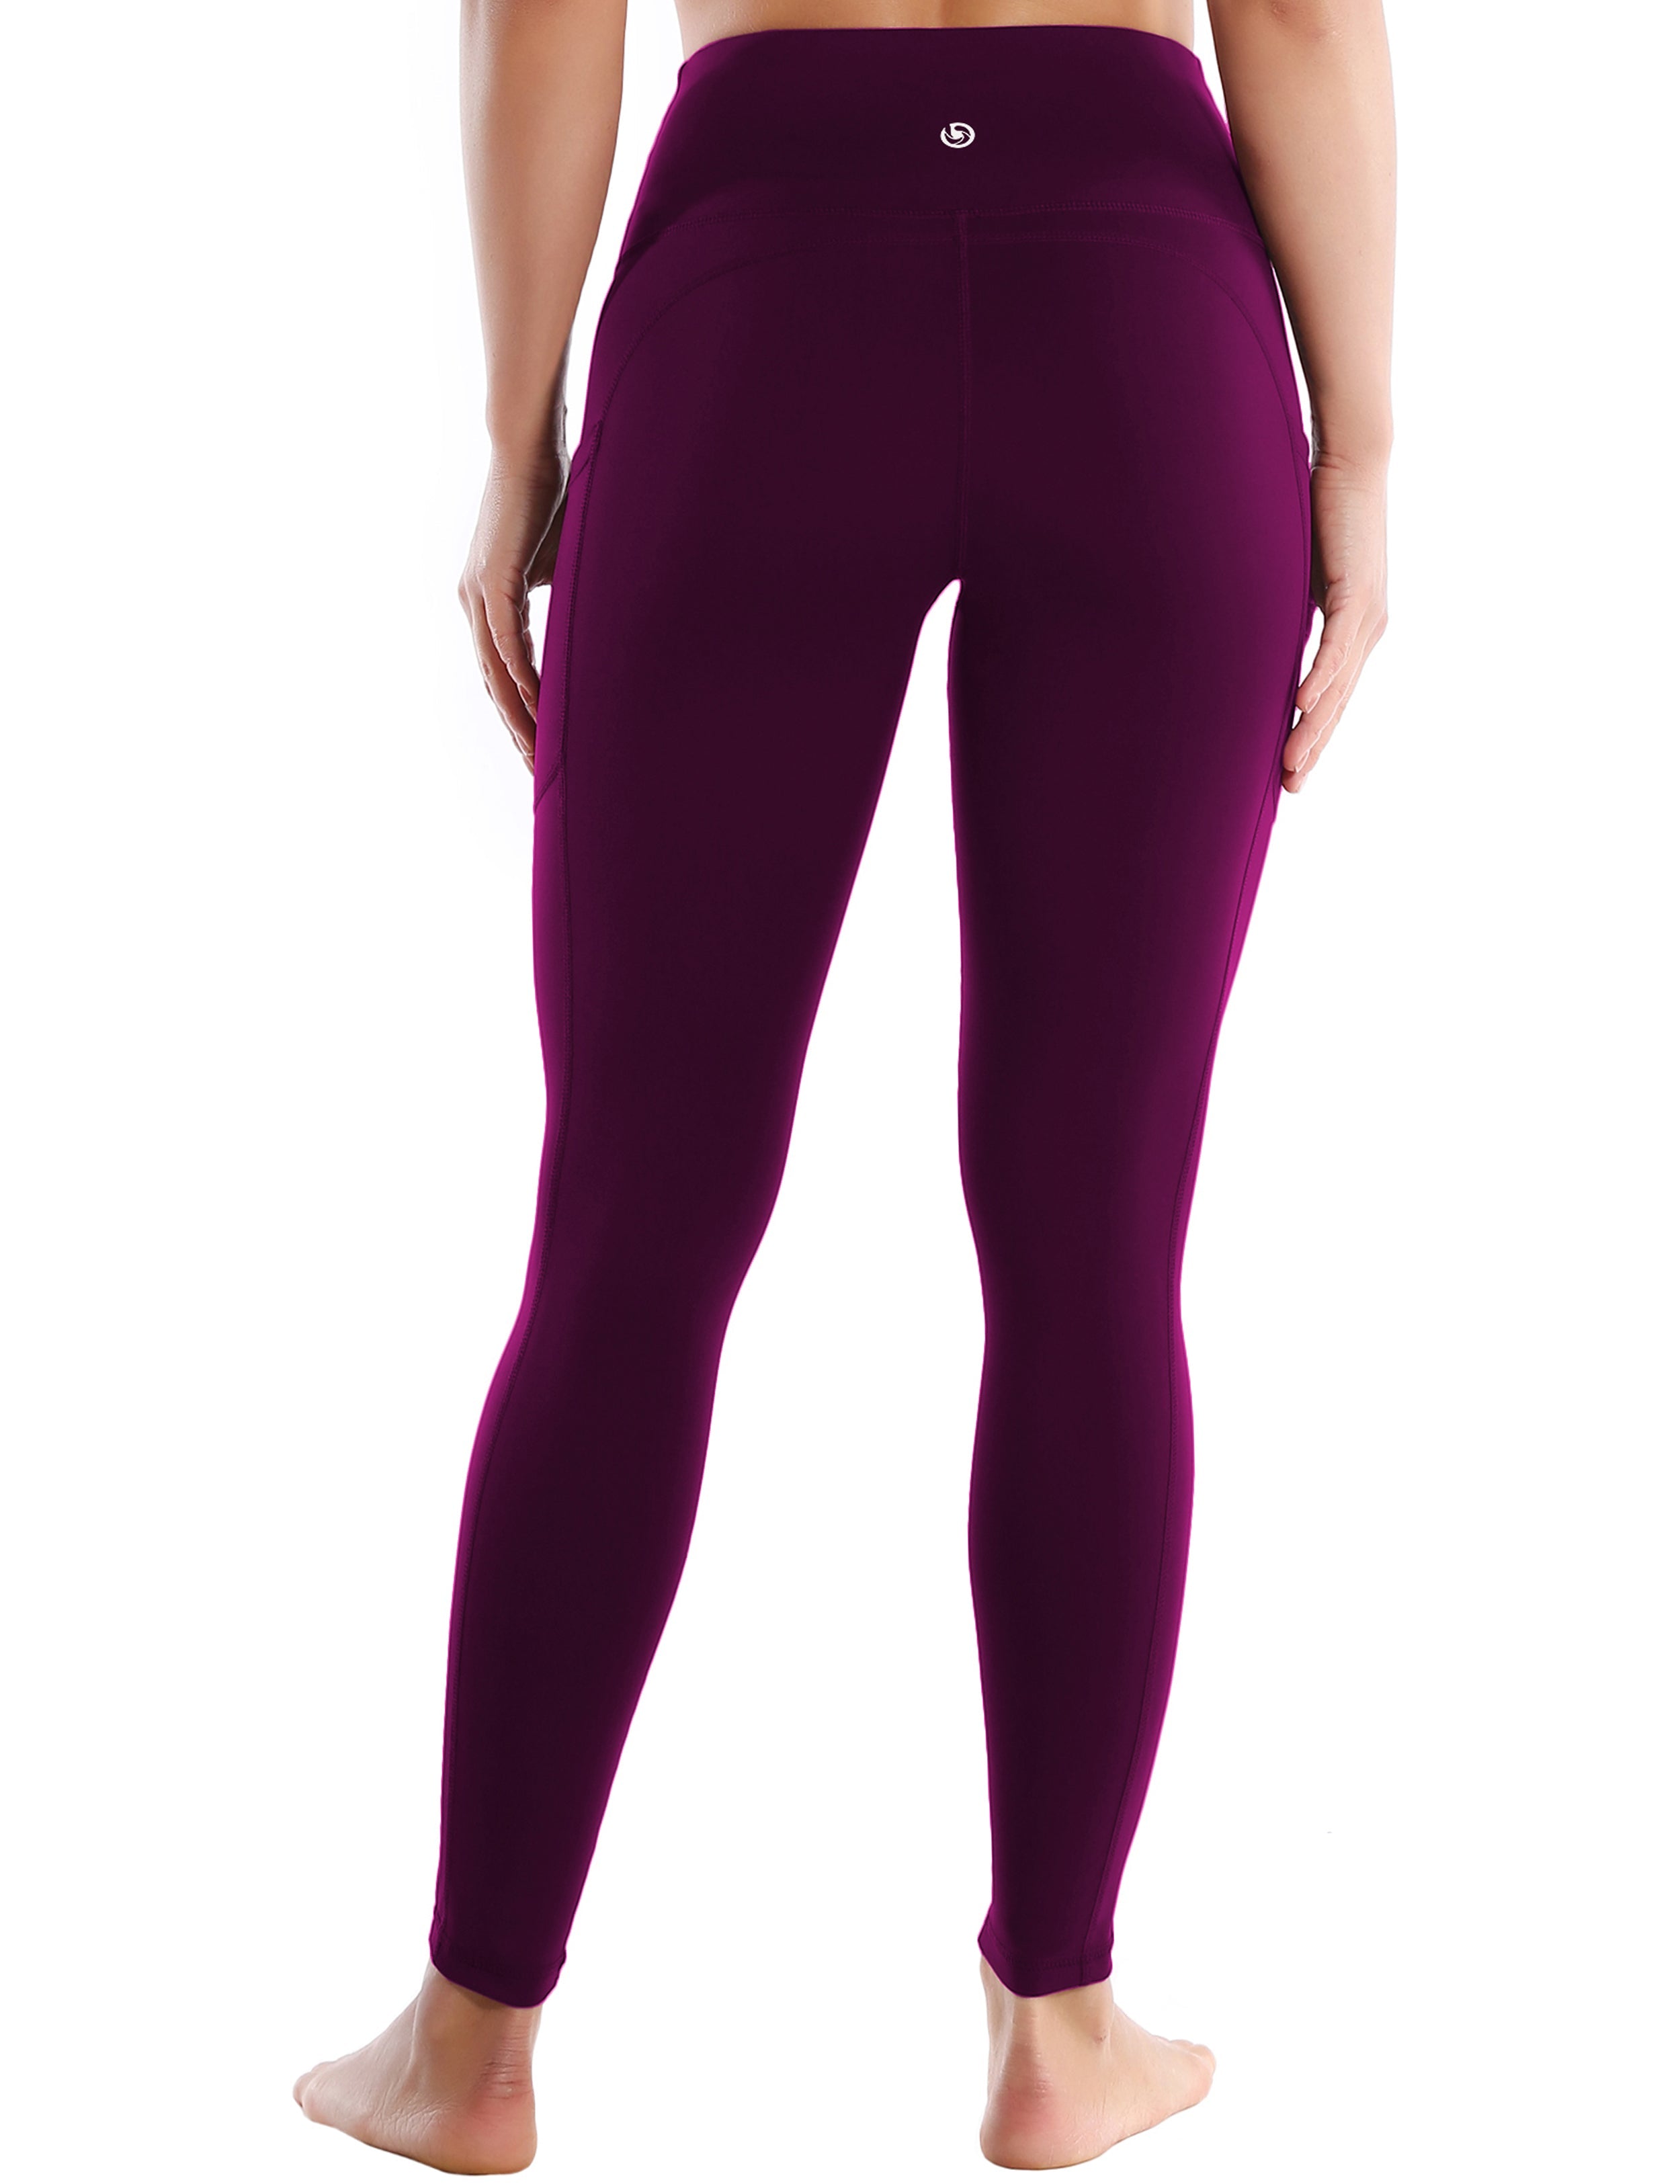 Hip Line Side Pockets Pilates Pants plum Sexy Hip Line Side Pockets 75%Nylon/25%Spandex Fabric doesn't attract lint easily 4-way stretch No see-through Moisture-wicking Tummy control Inner pocket Two lengths